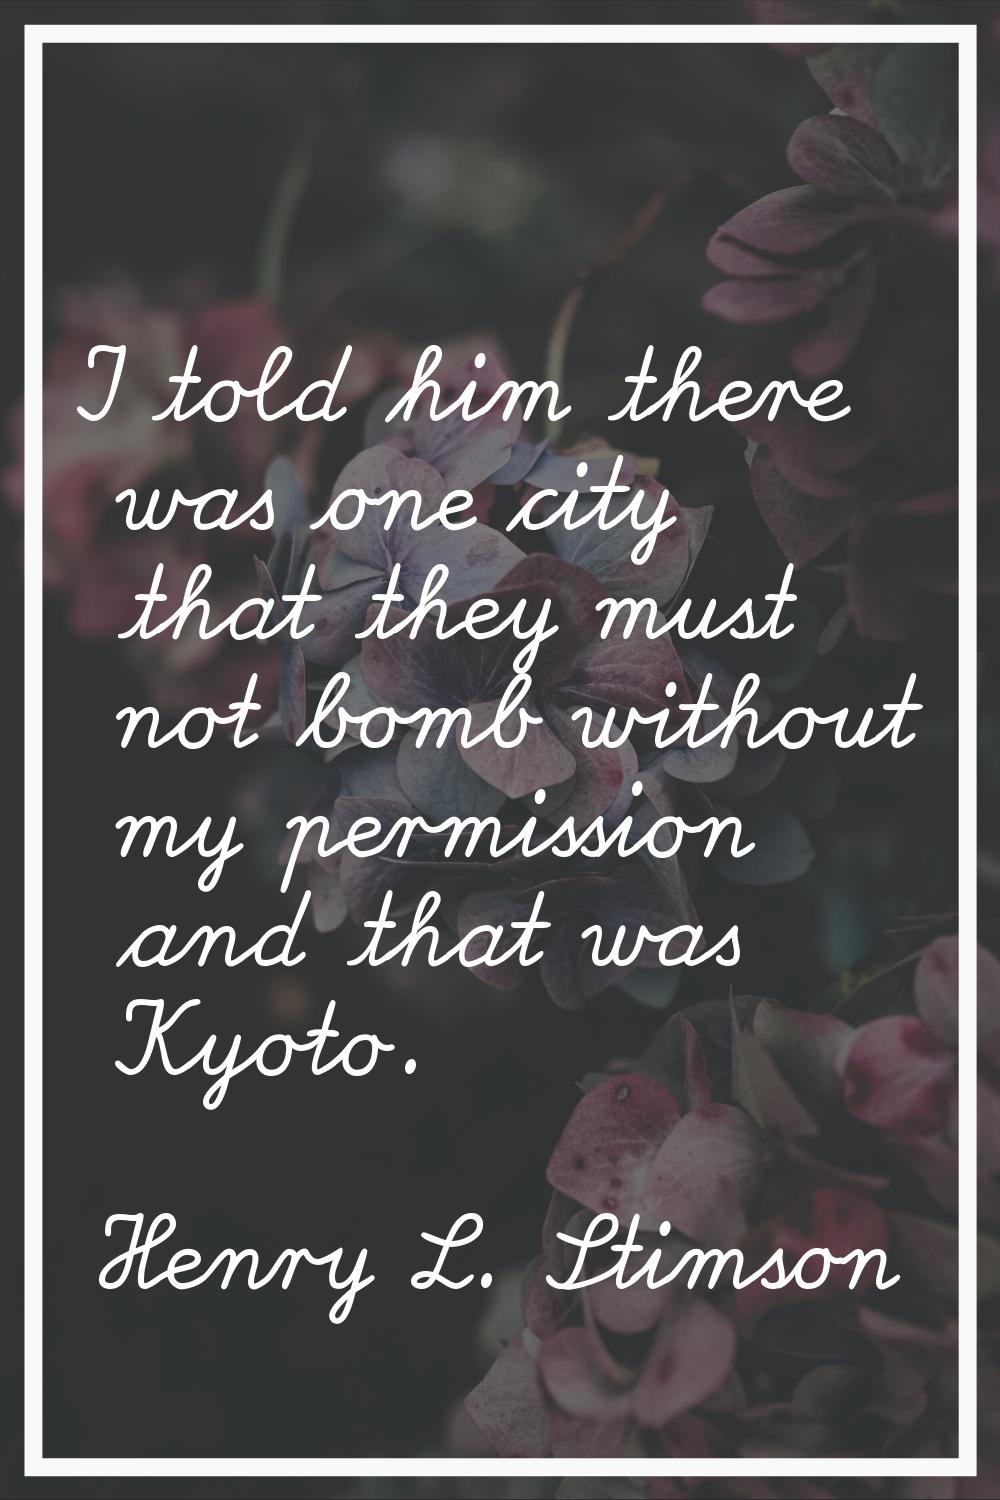 I told him there was one city that they must not bomb without my permission and that was Kyoto.